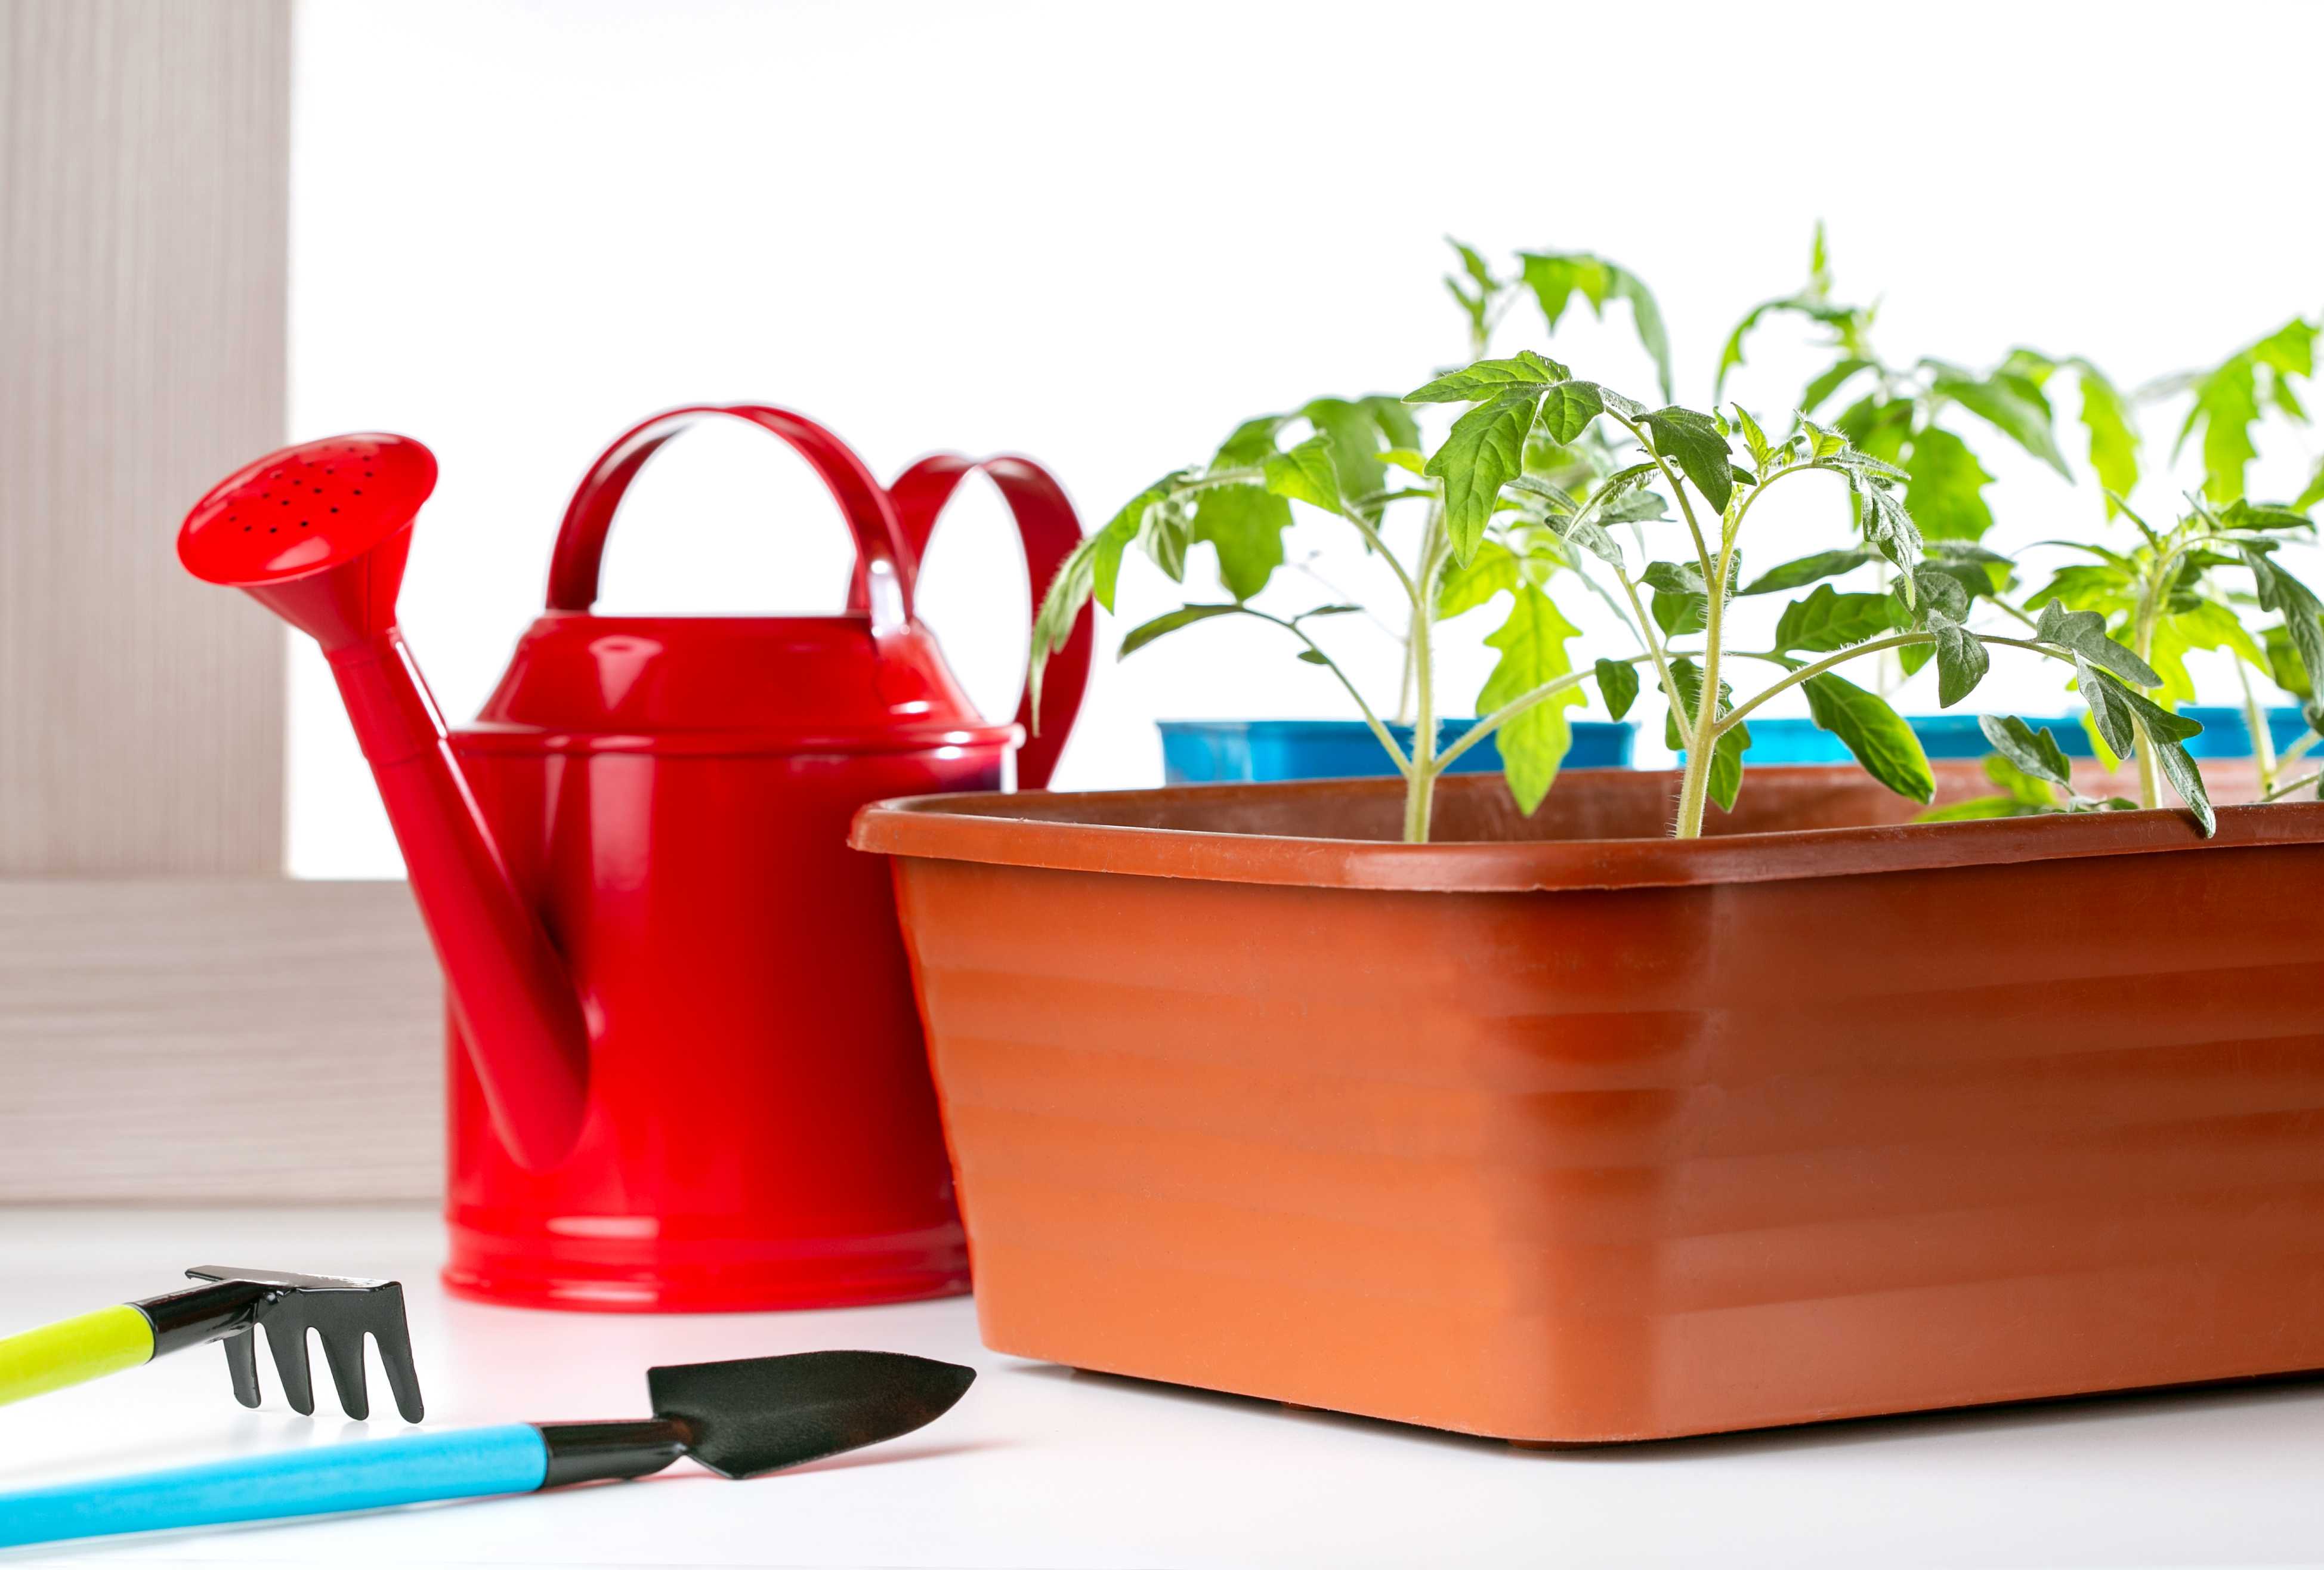 tomato sprouts in a pot and watering can by it.